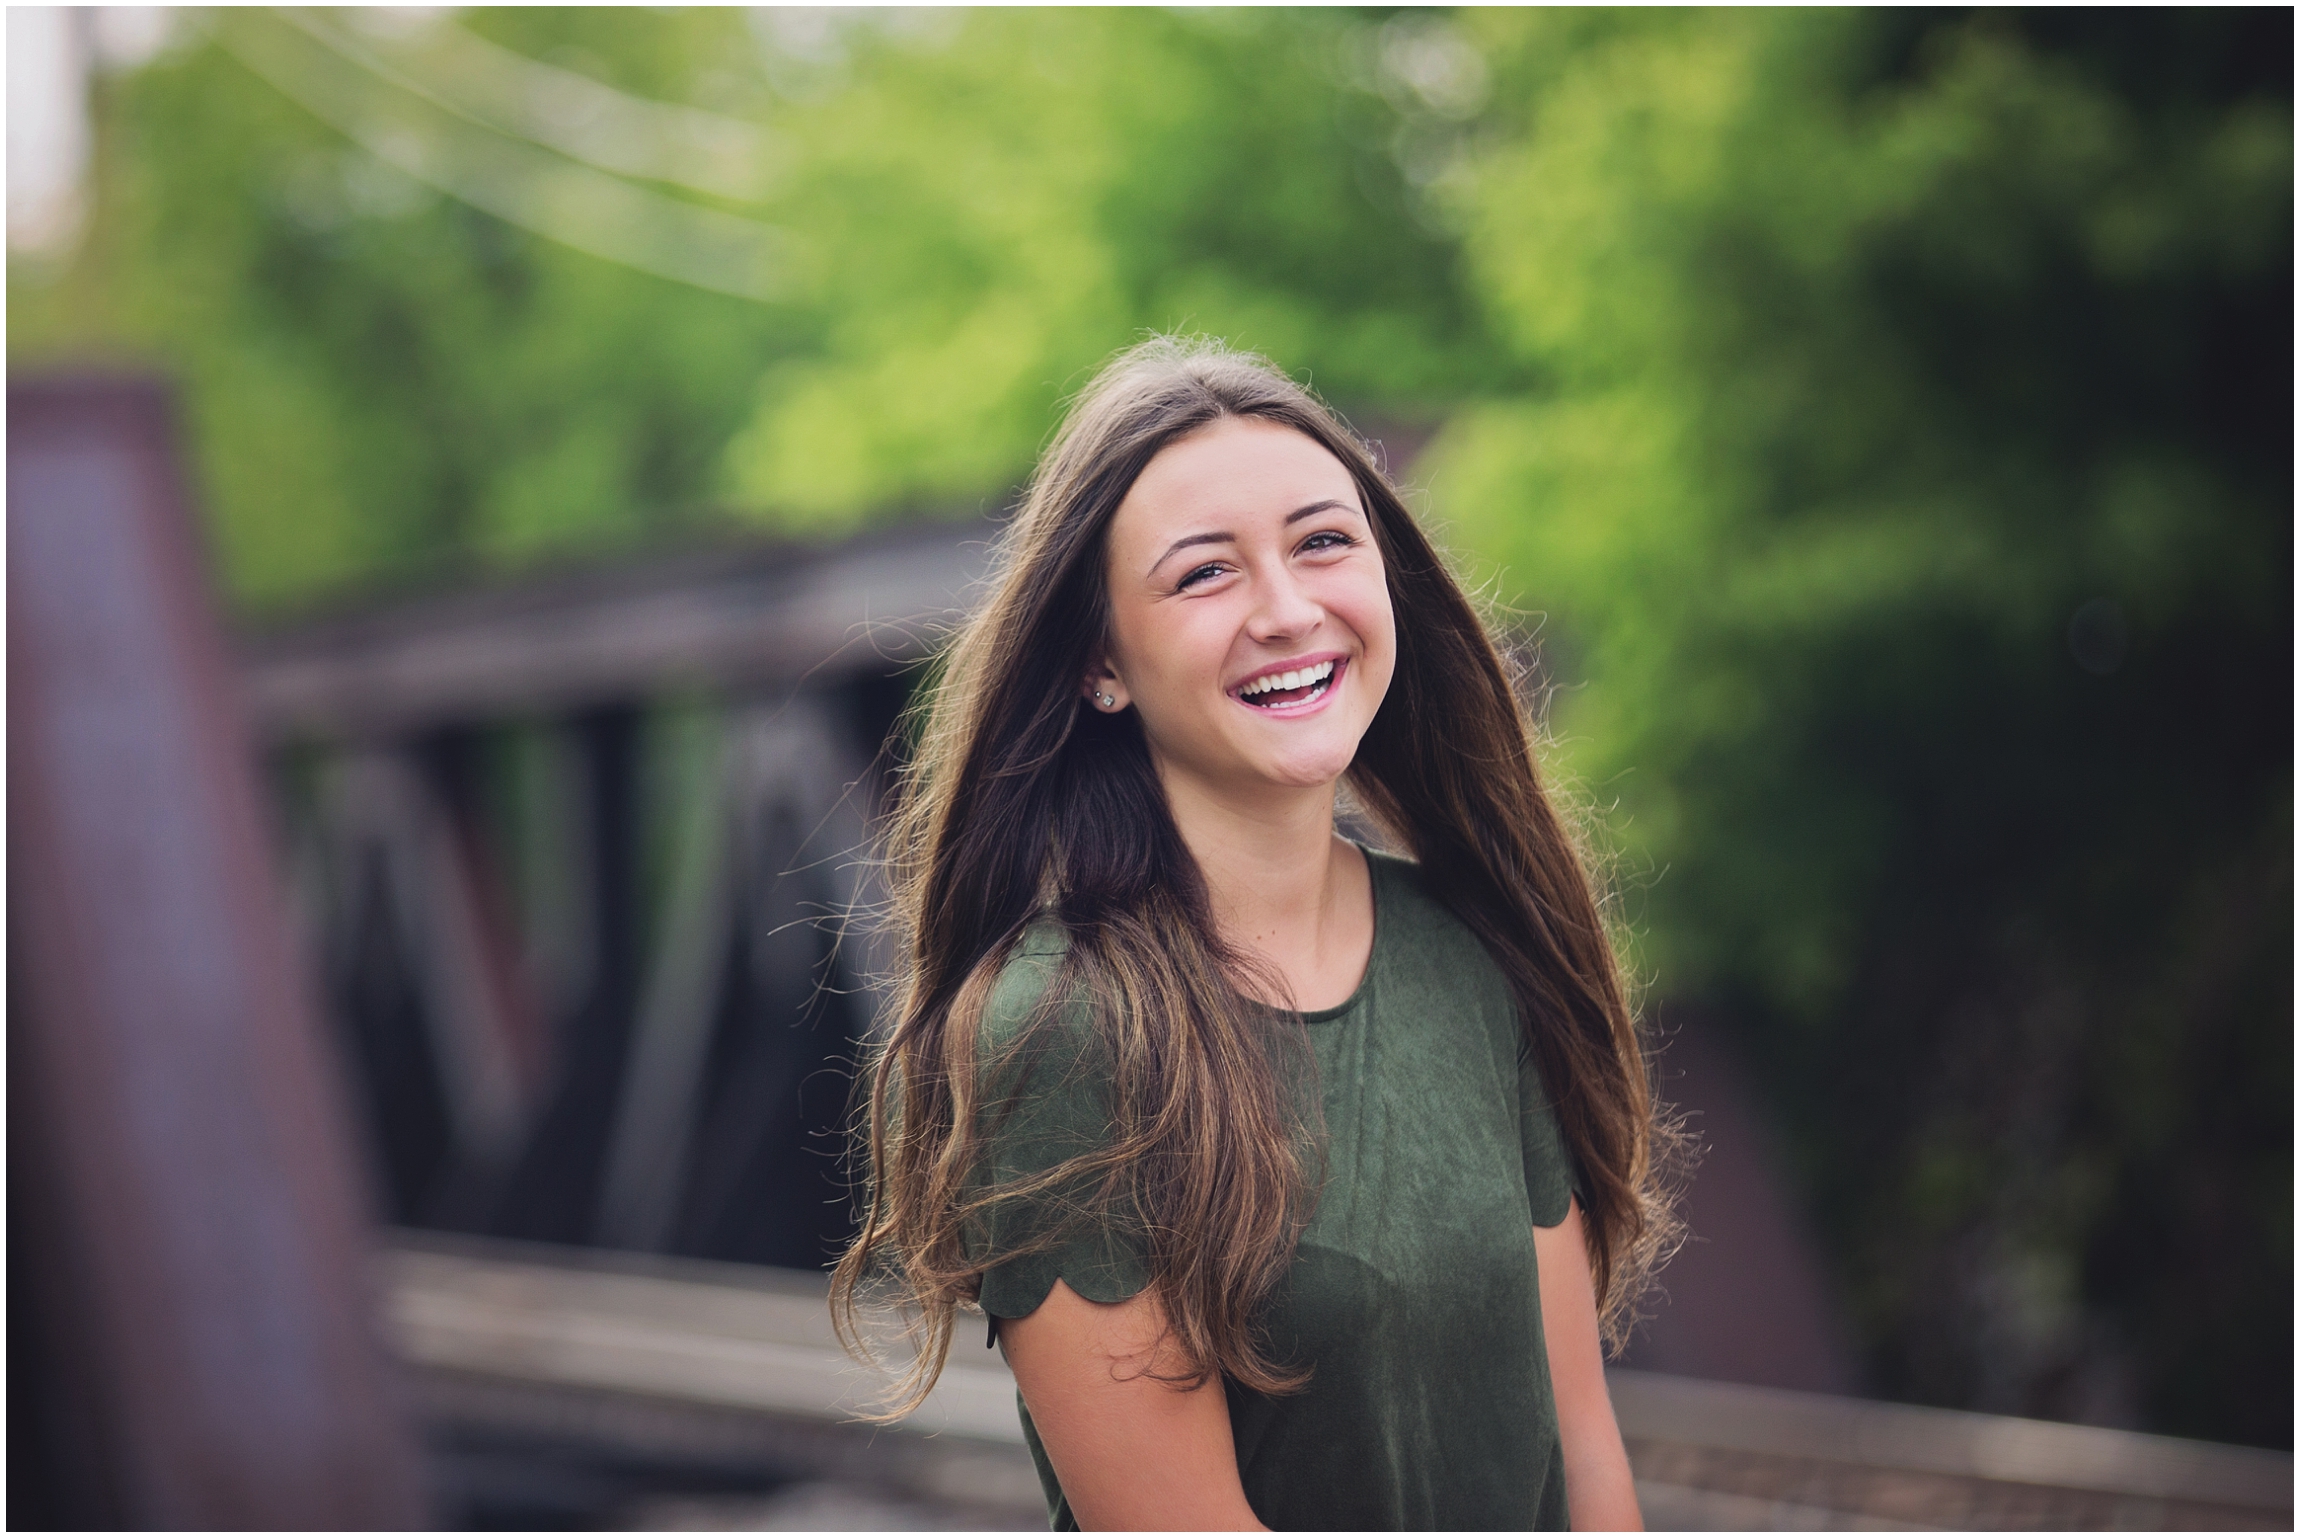 Editorial Senior pictures Milwaukee - Amarie Photography